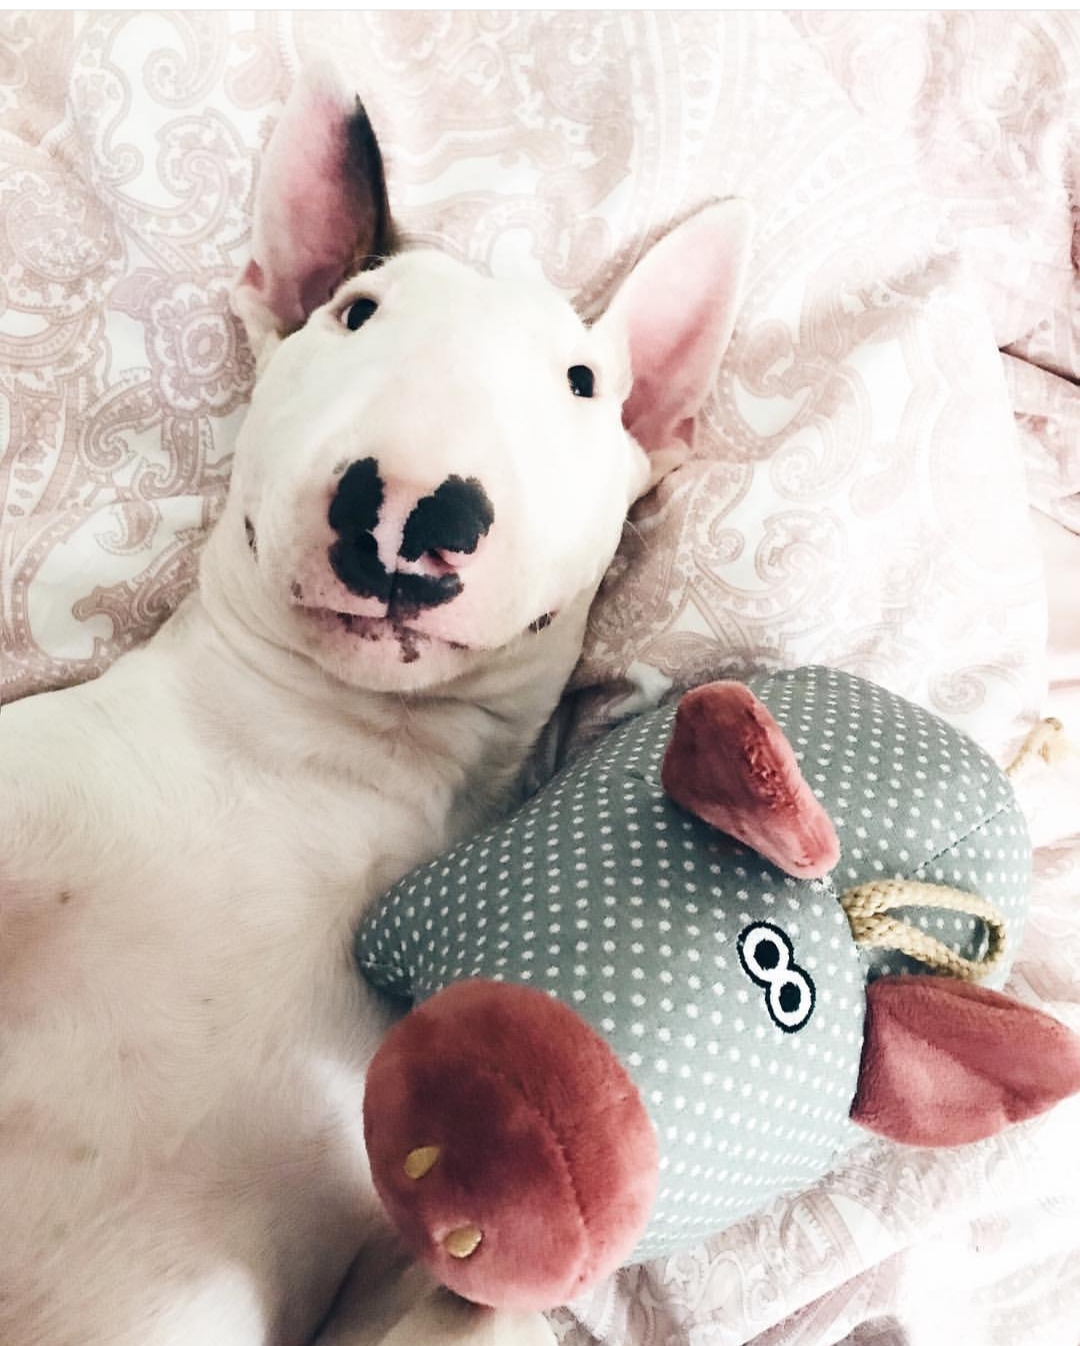 English Bull Terrier lying on the bed with its pig stuffed toy